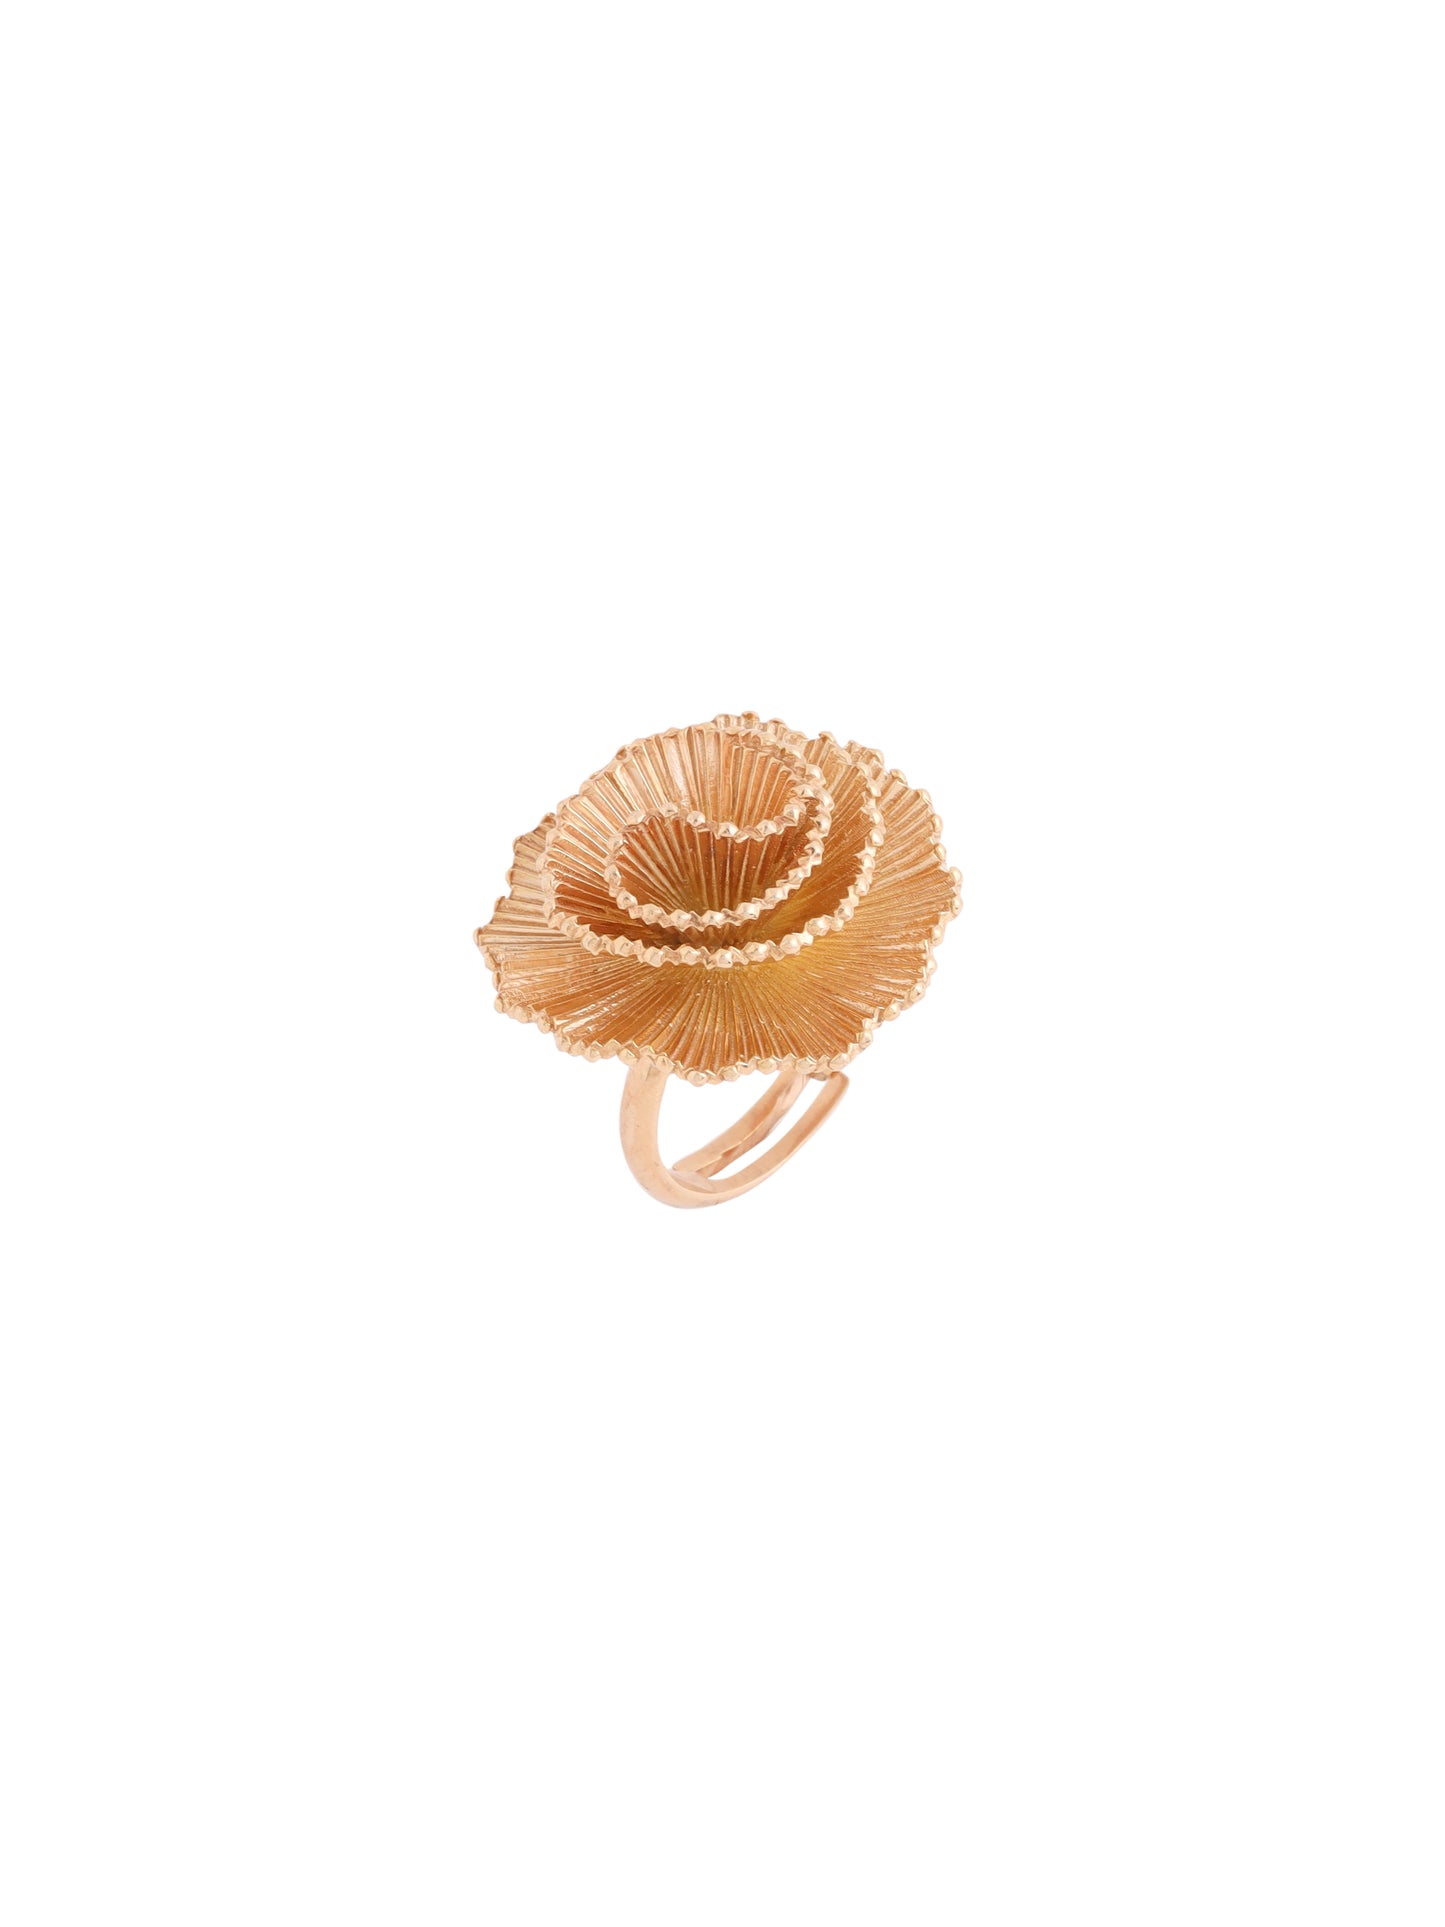 Kicky and Perky 925 Sterling silver Rose Gold Floral Frill Adjustable Ring for Women